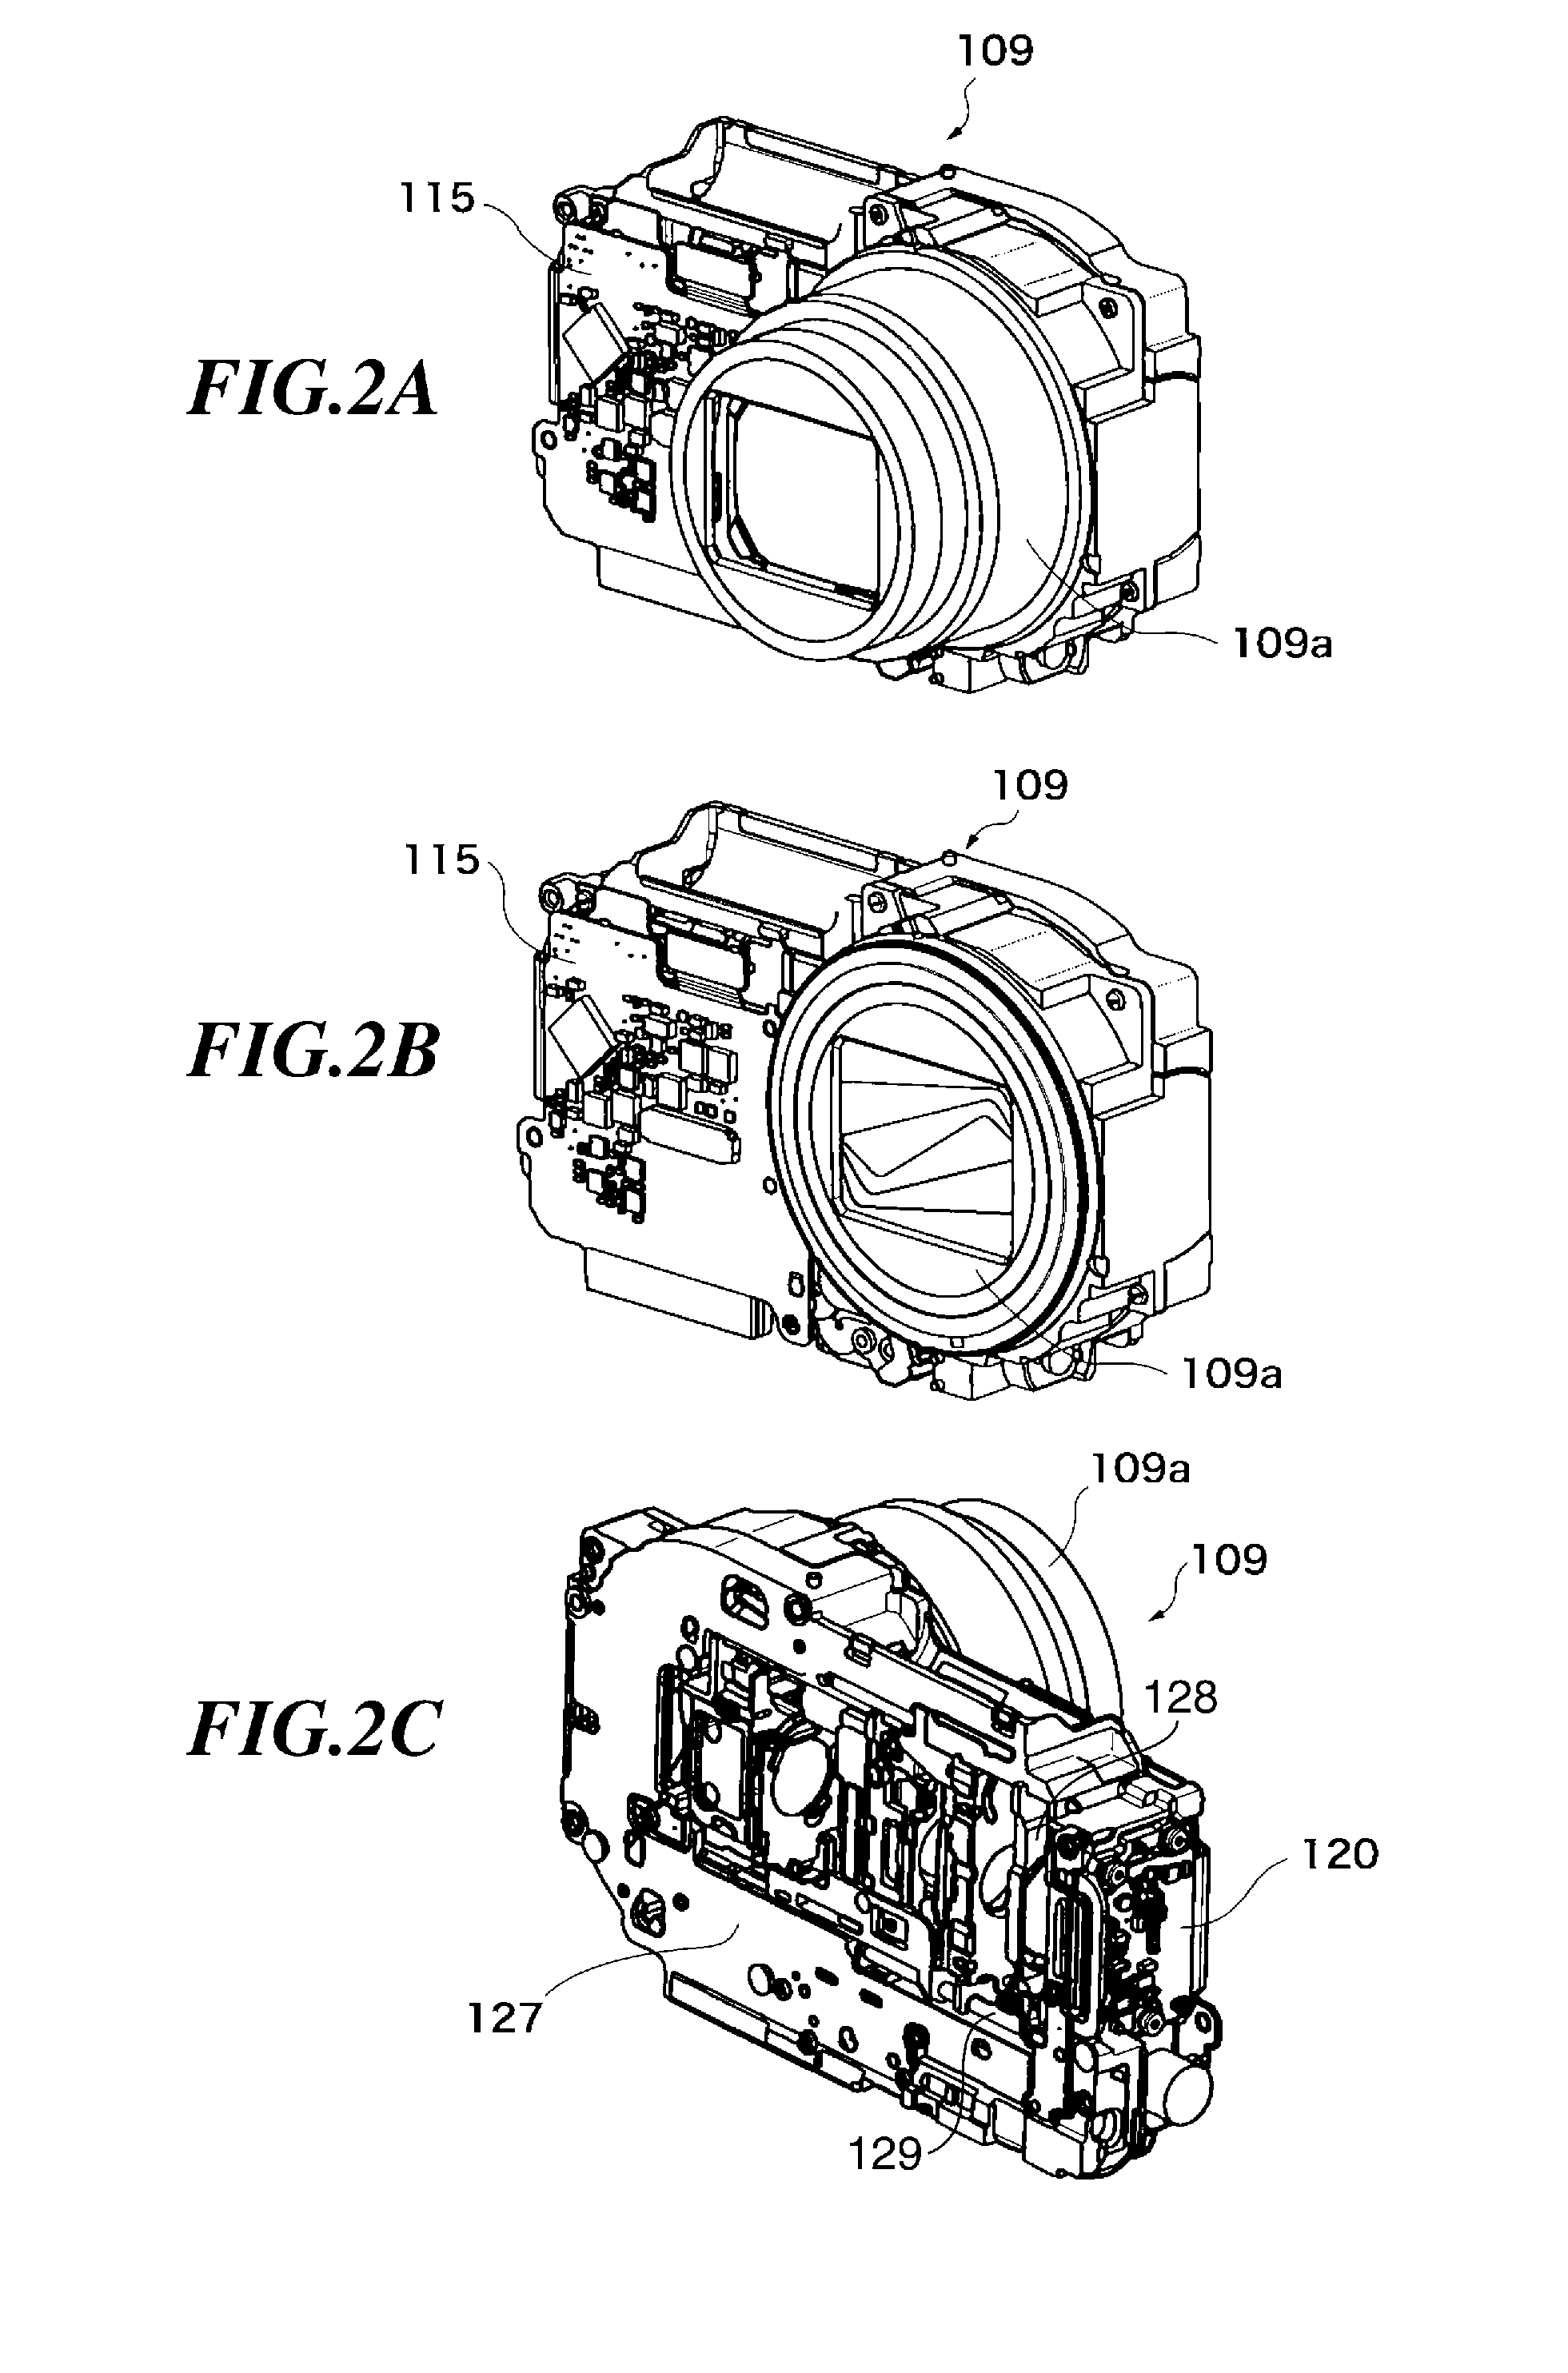 Image pickup apparatus capable of releasing heat efficiently